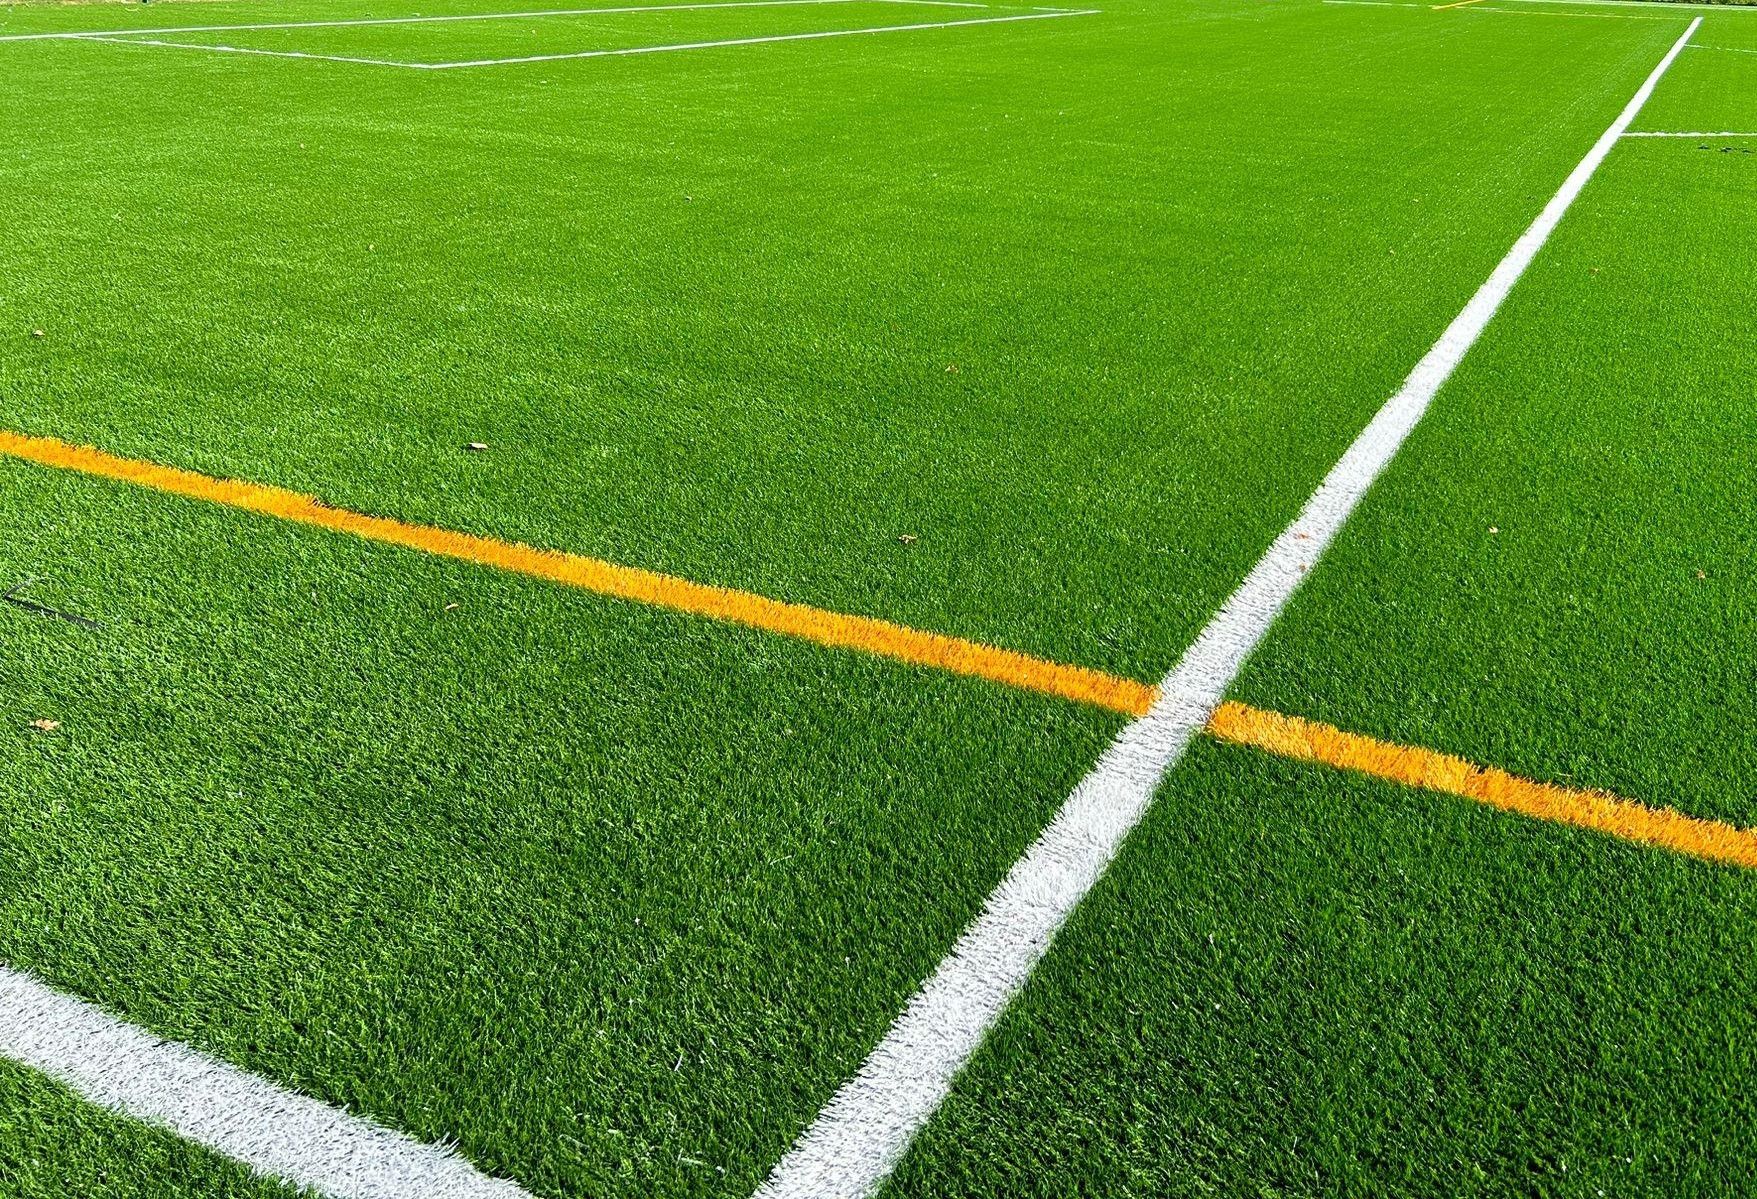 close-up pf 3G football Pitch with Pitch marking